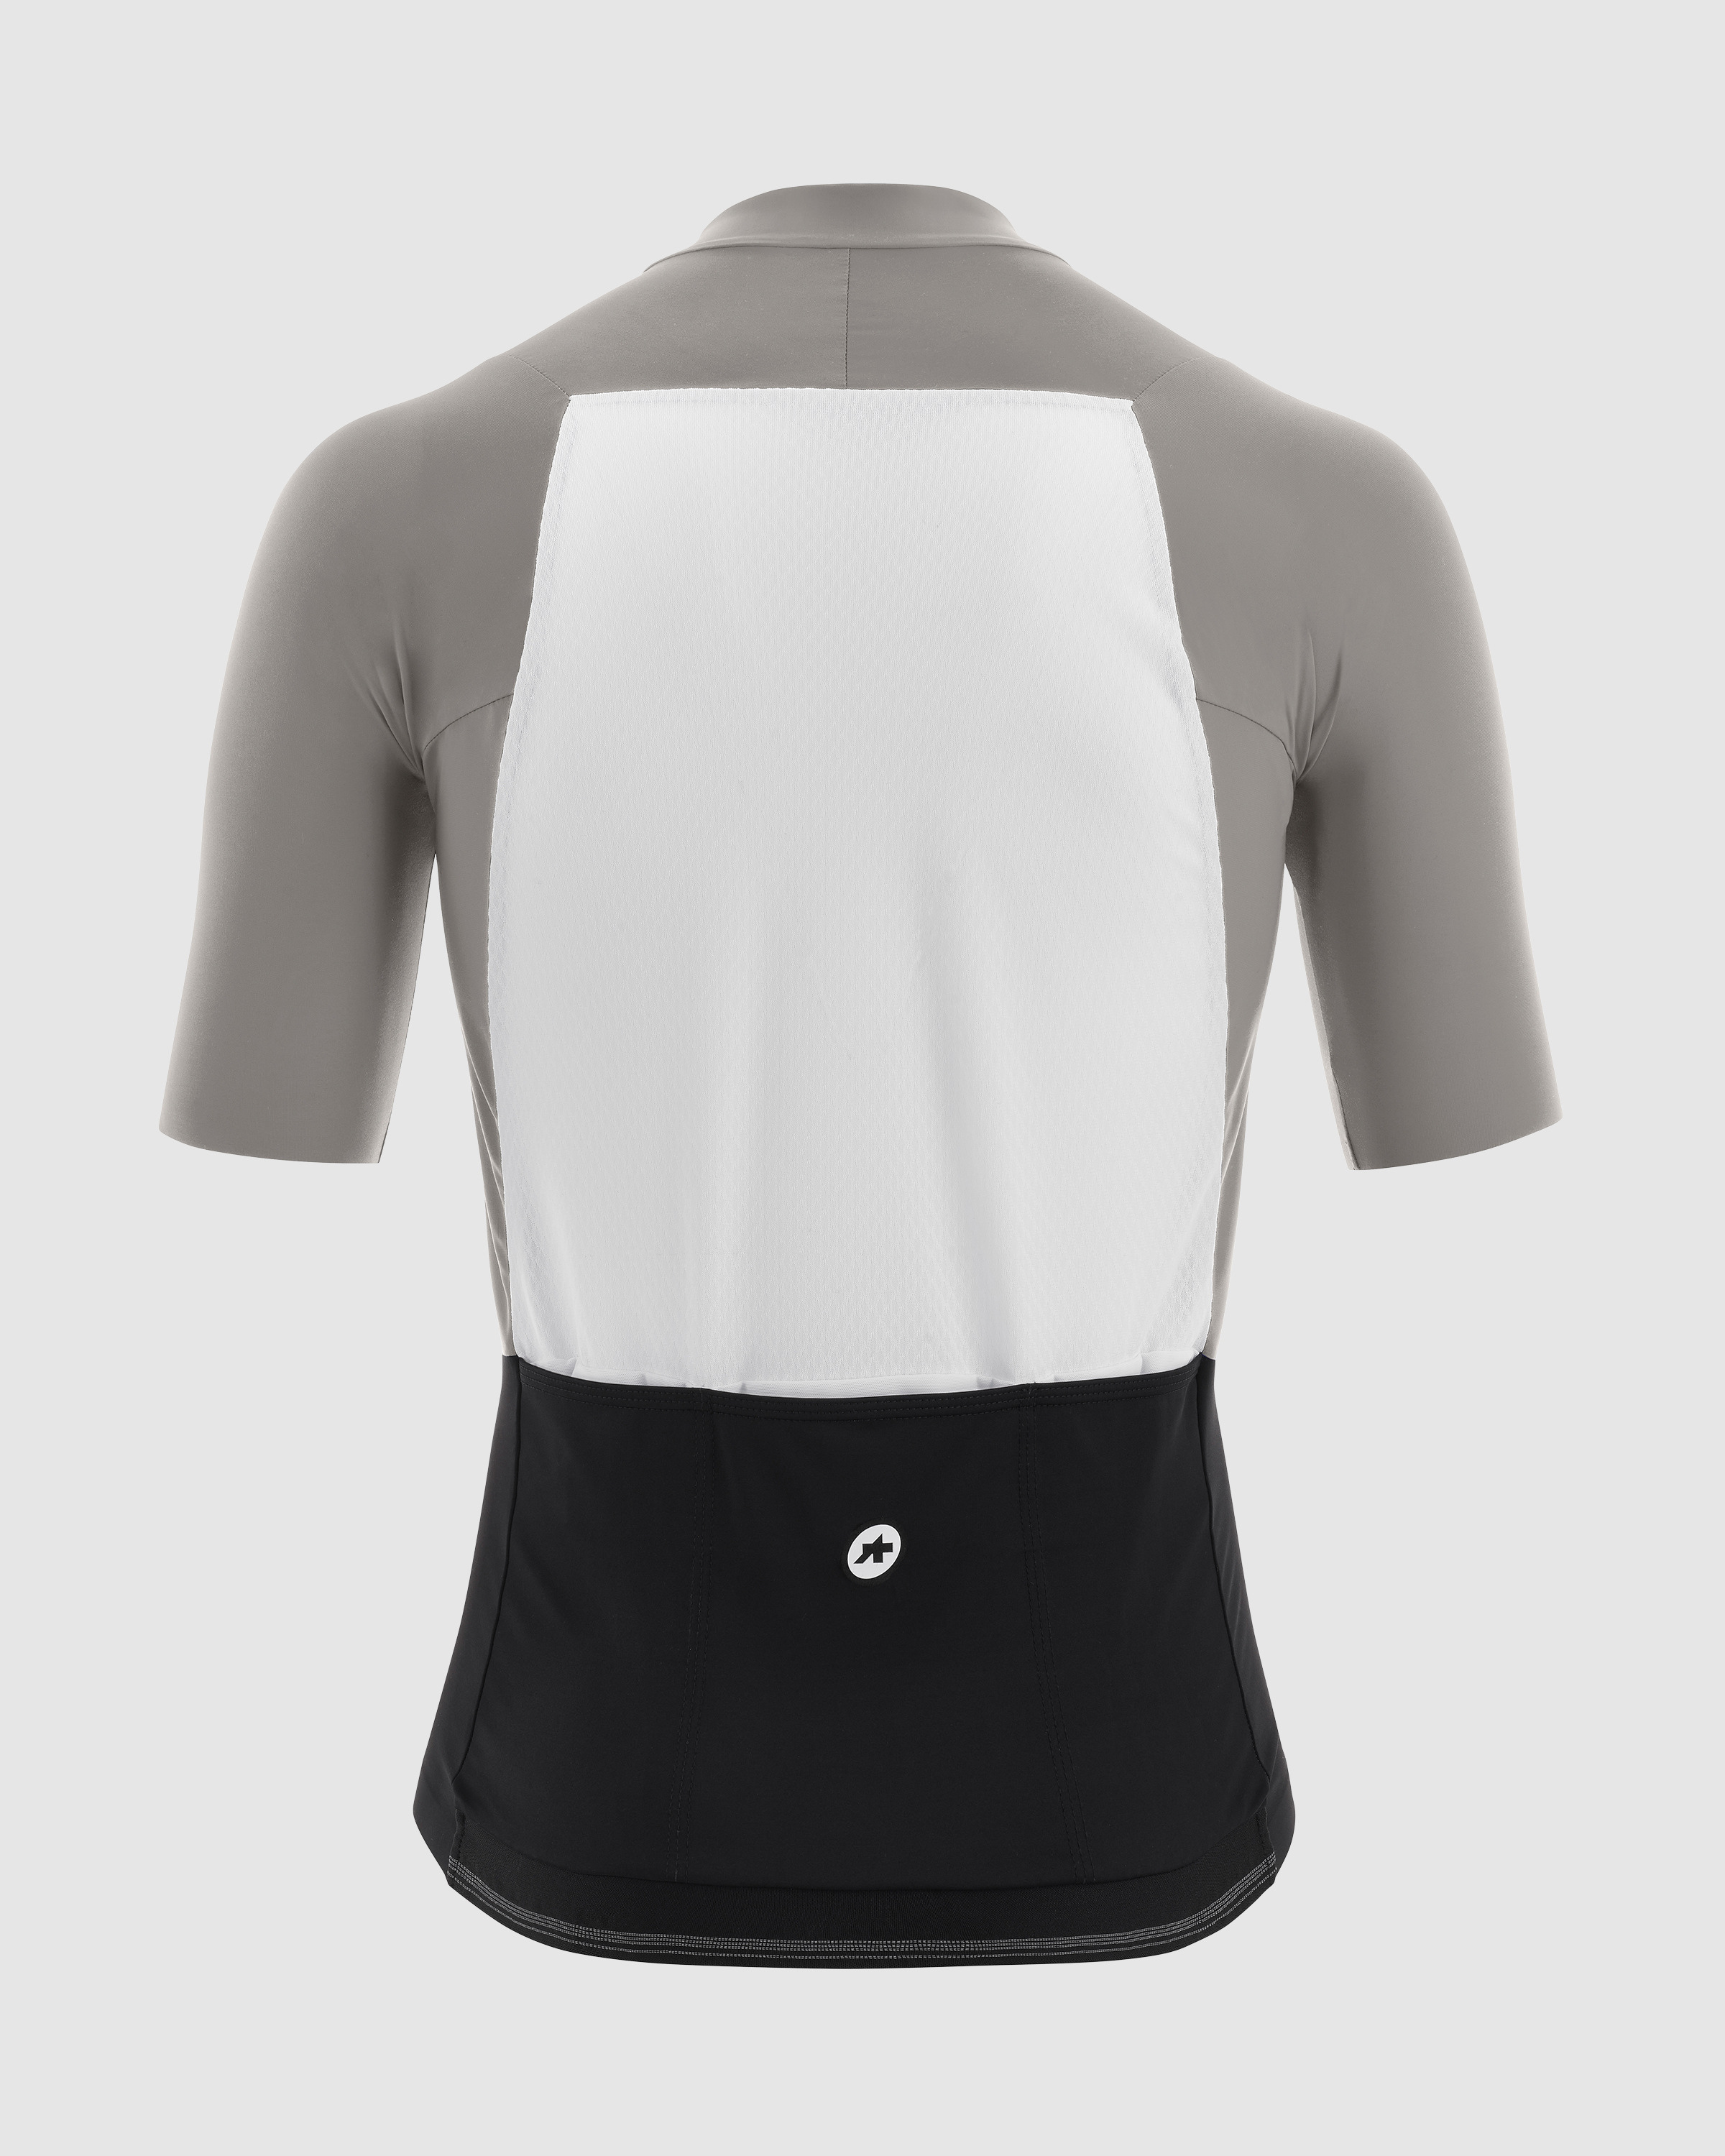 MILLE GTS Jersey C2 - ASSOS Of Switzerland - Official Outlet